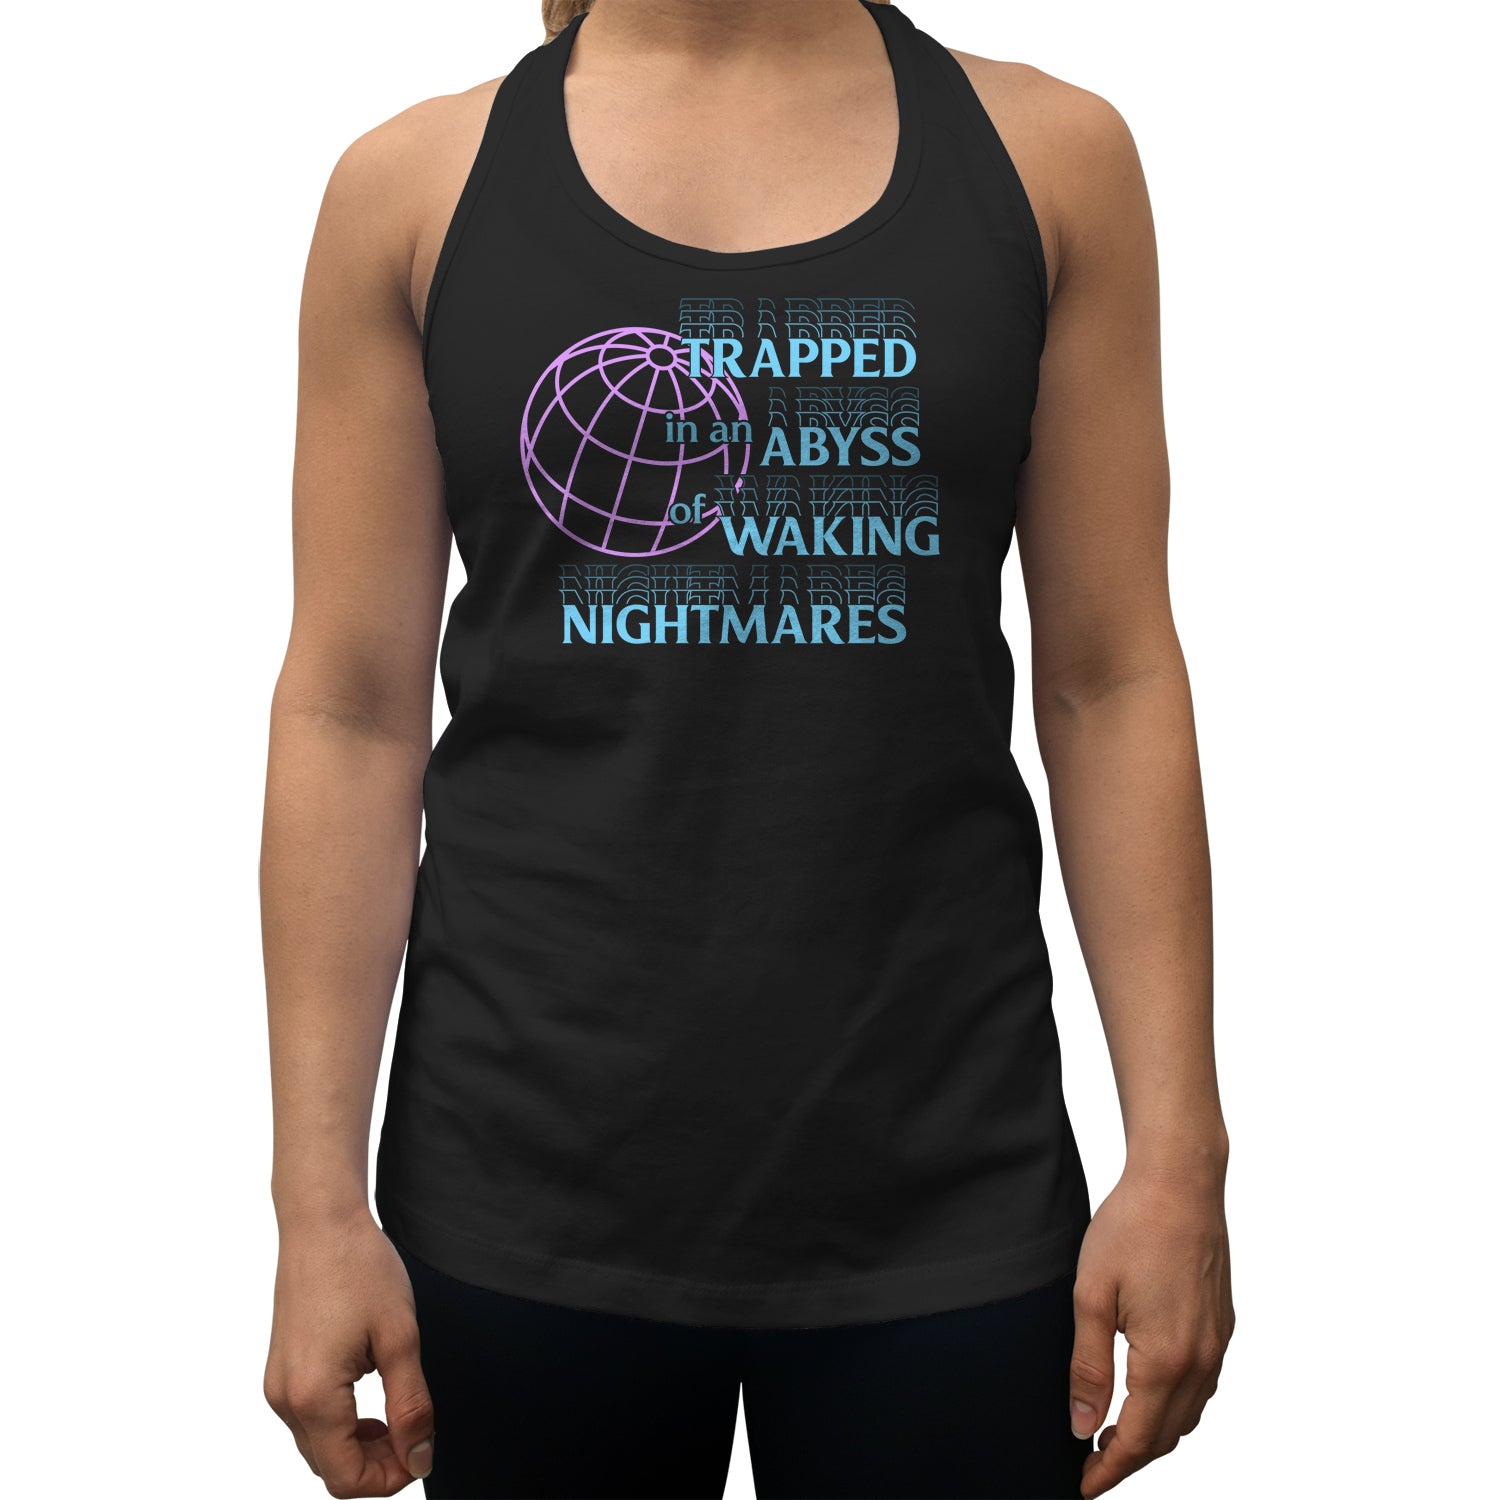 Women's Trapped in an Abyss of Waking Nightmares Racerback Tank Top